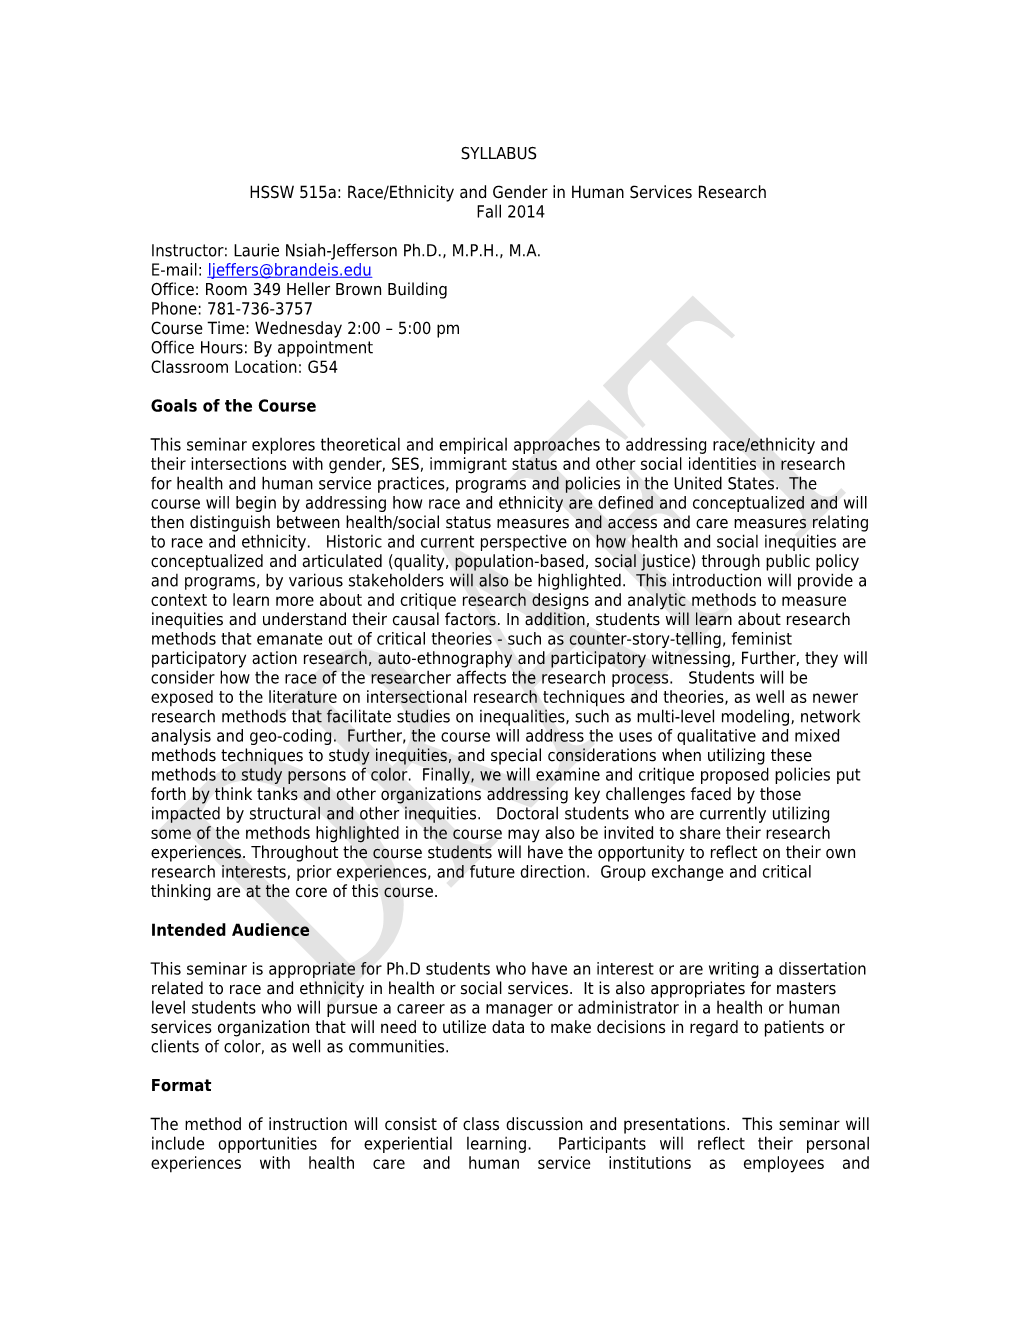 HSSW 515A: Race/Ethnicity and Gender in Human Services Research